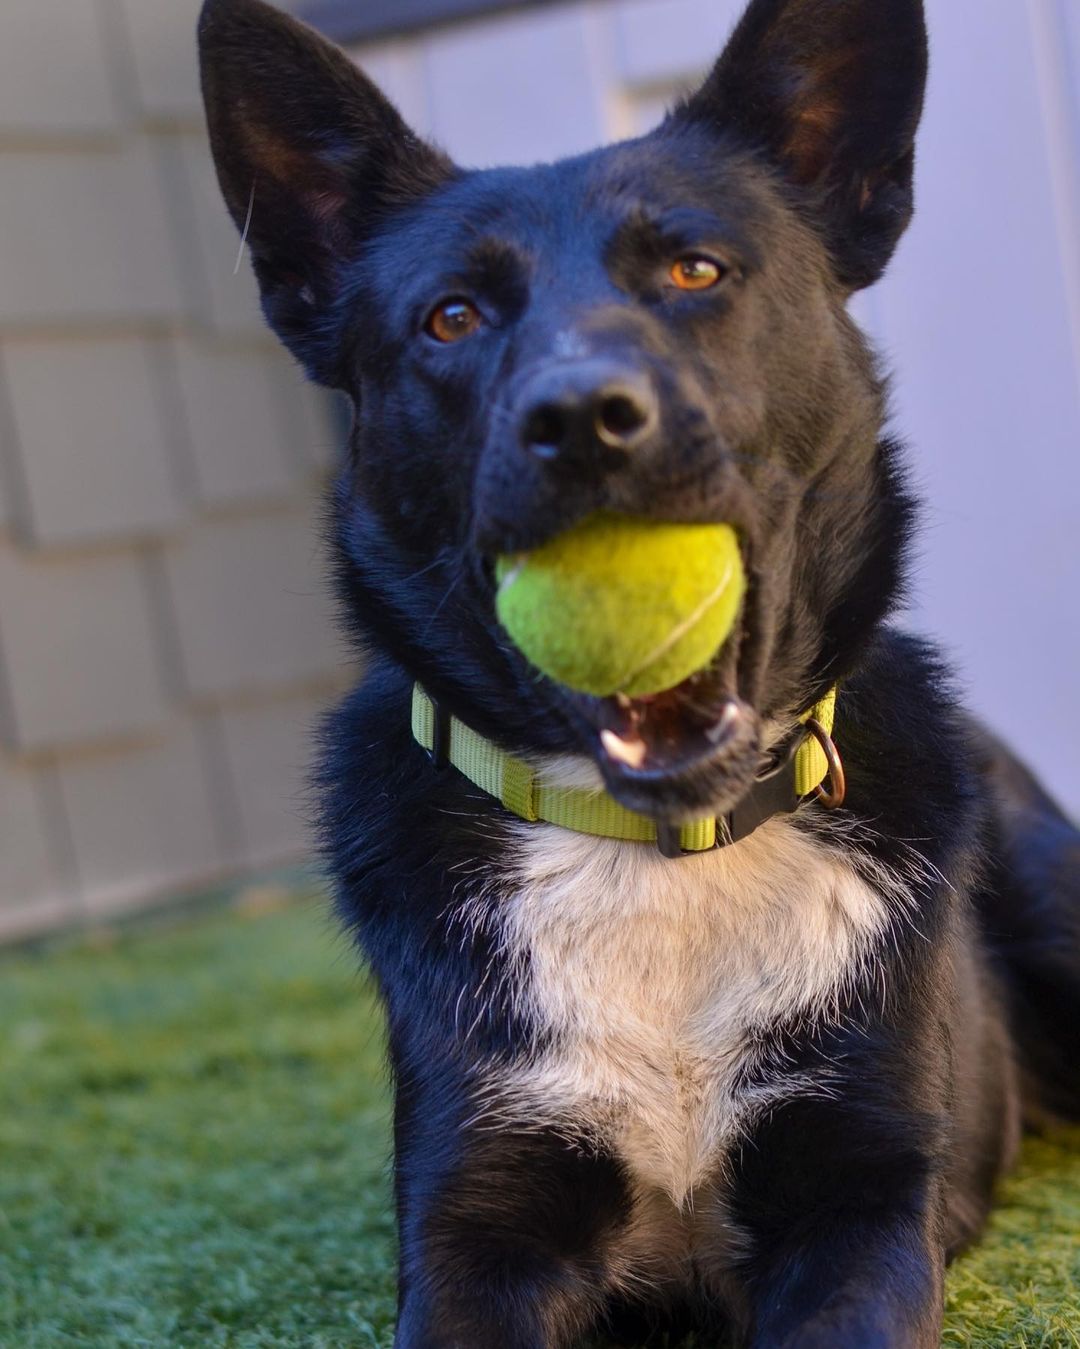 Now Available for Adoption:

It's time to play with Rhea! 

Happiest with a toy in her hand, Rhea's heart can be yours in exchange for a tennis ball, a rope, or something that squeaks. Friendly and active, Rhea's perfect person will be one as interested in being her best friend as she is yours, ready to take on the days together with enthusiasm and goofiness. 

As smart as she is spunky, Rhea thrives when she has something to do. Learning leash manners quickly, Rhea is certainly a 